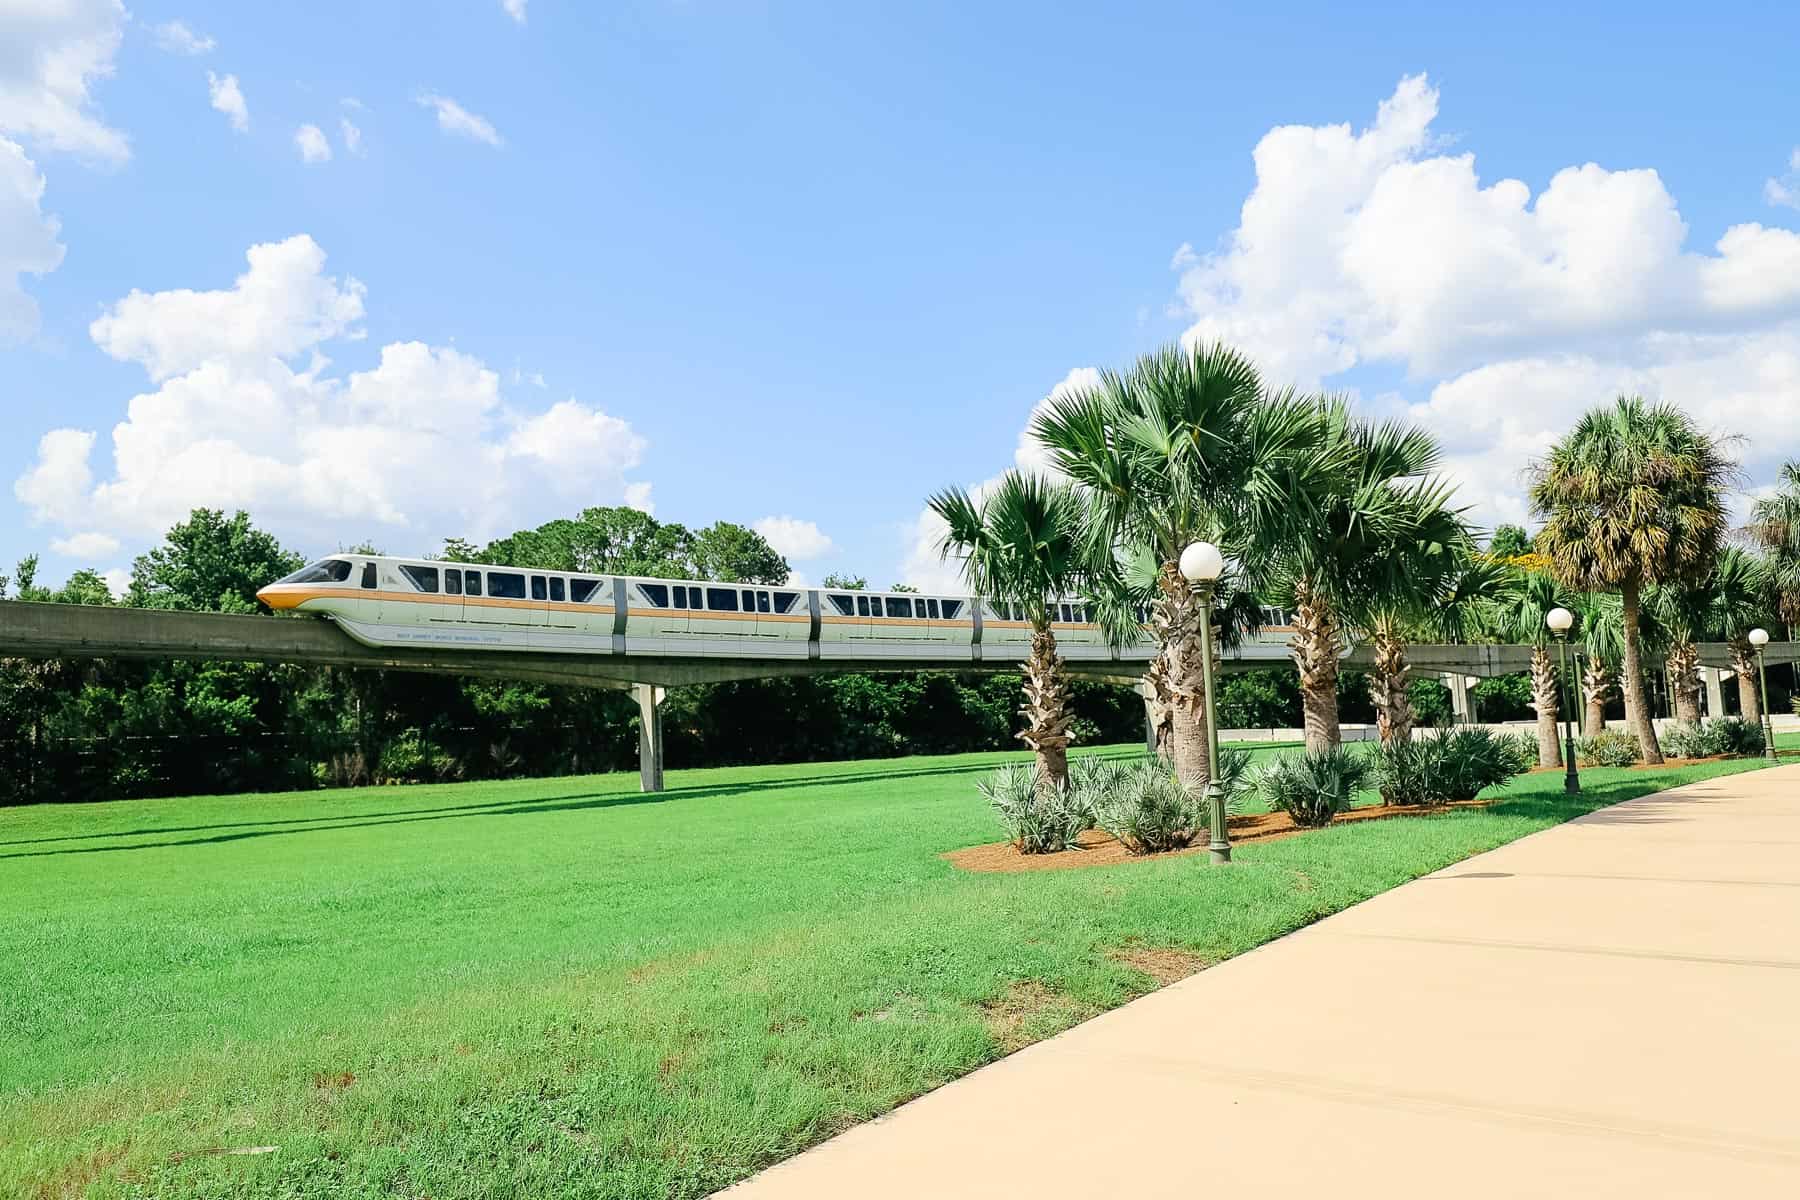 Monorail traveling to the resorts from Magic Kingdom. 